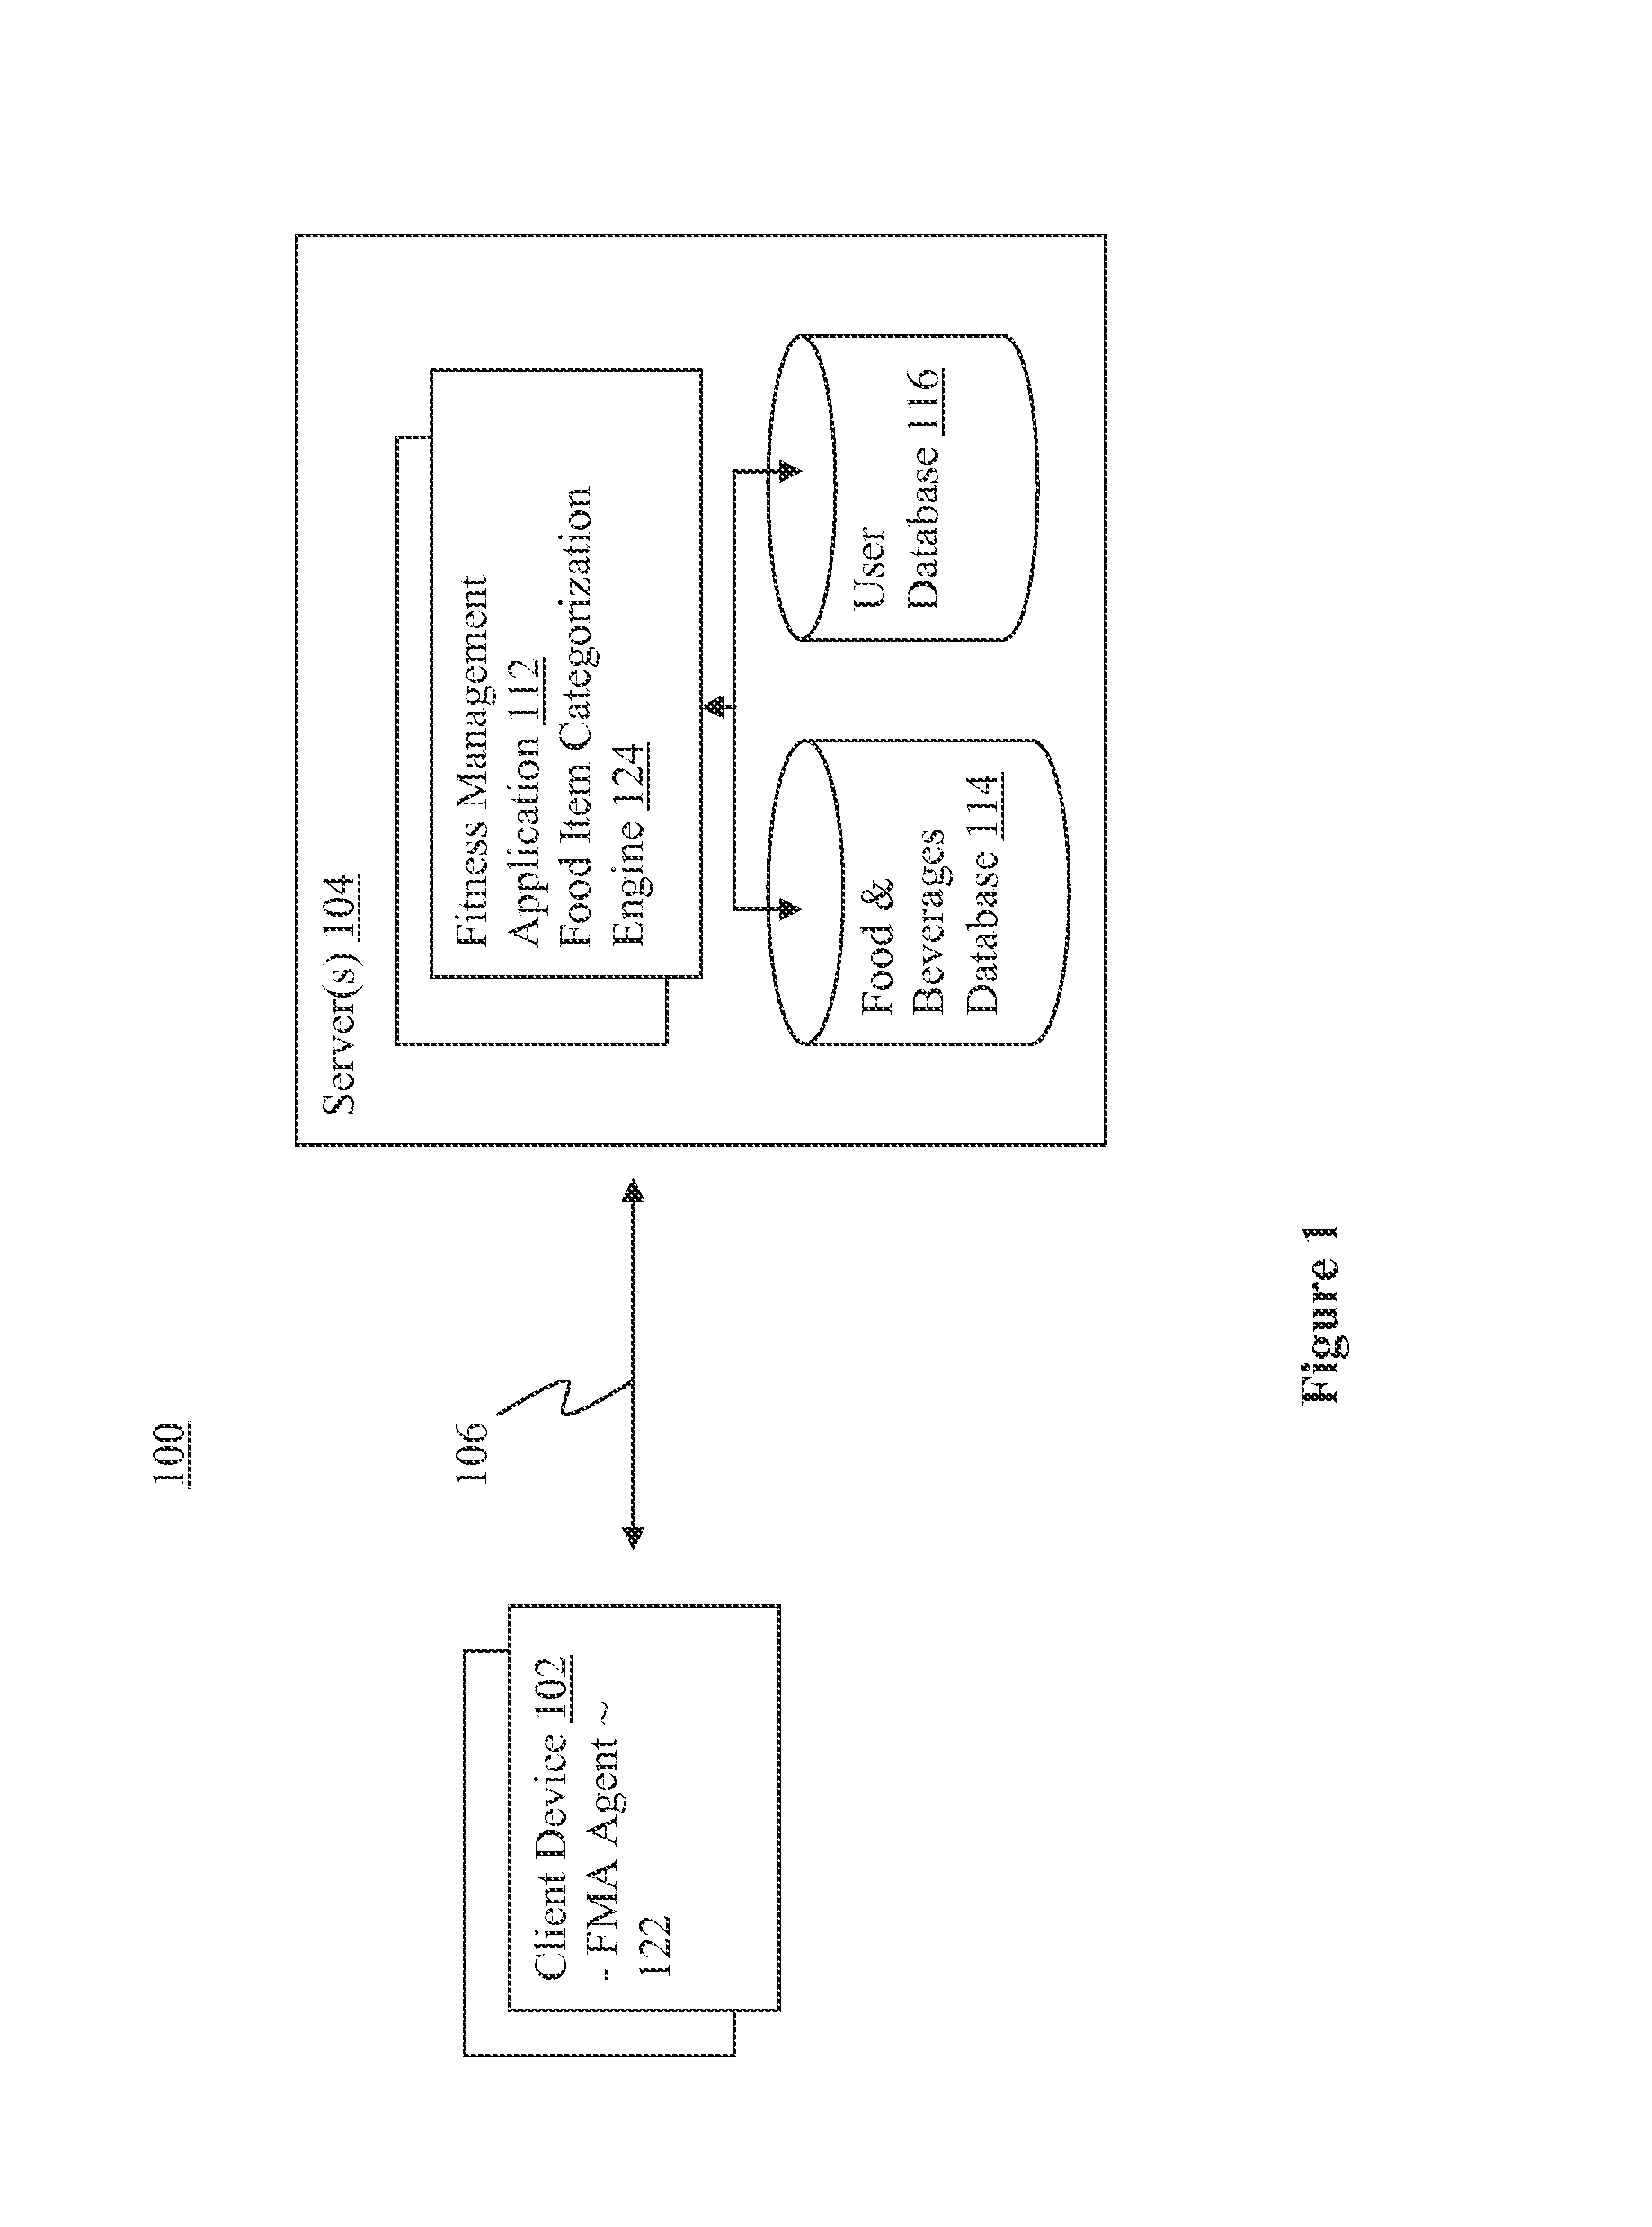 System and method for food categorization